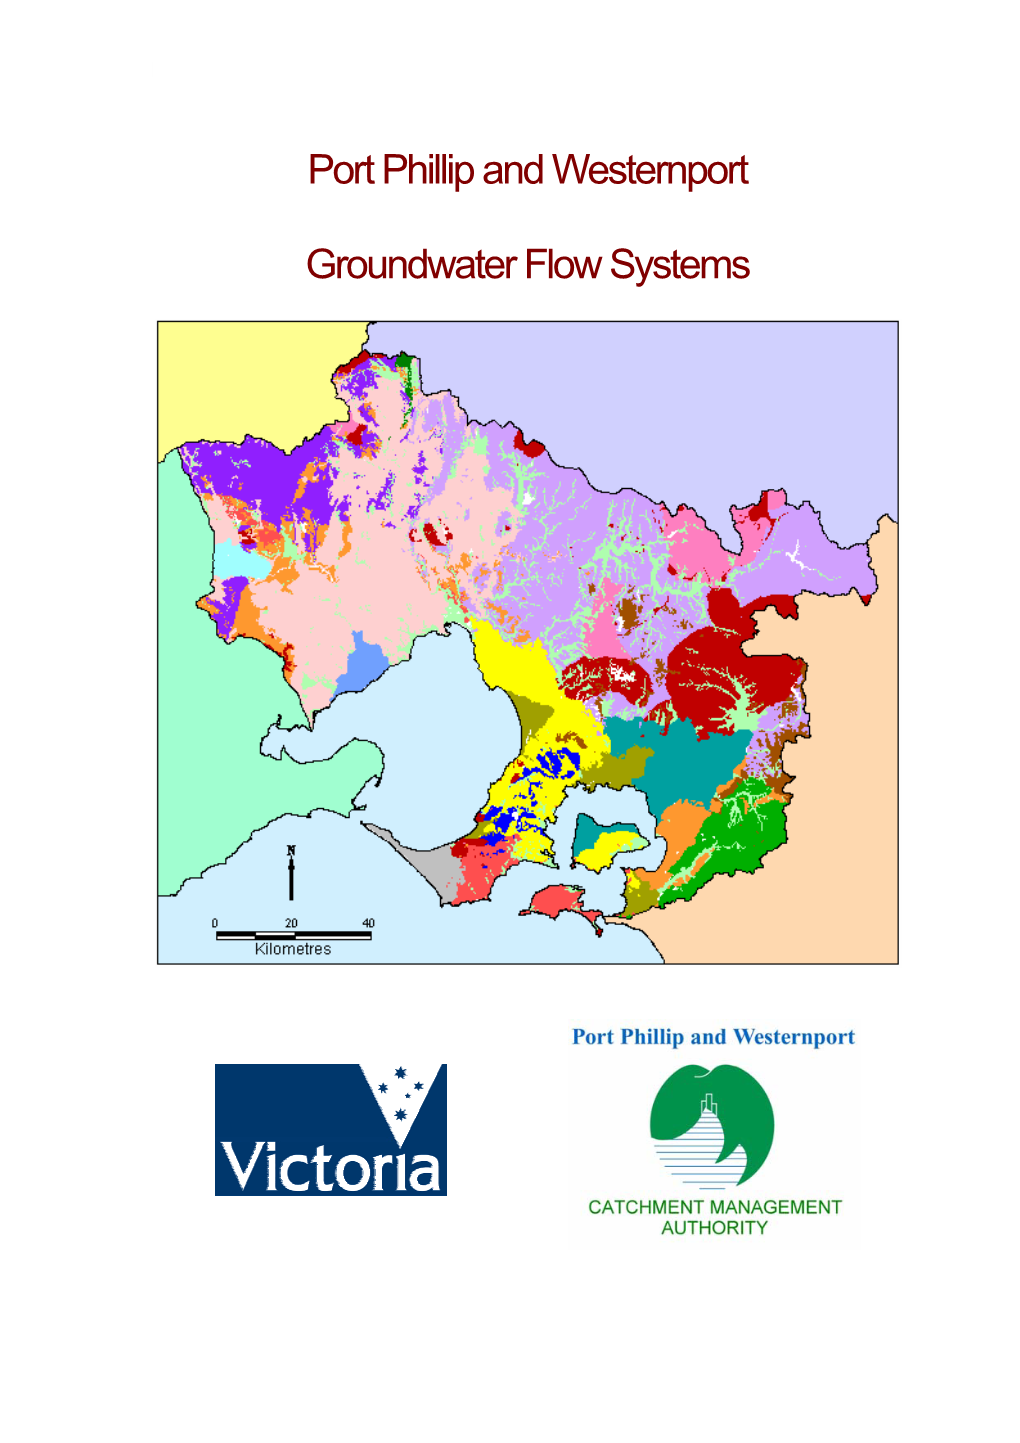 Port Phillip and Westernport Groundwater Flow Systems